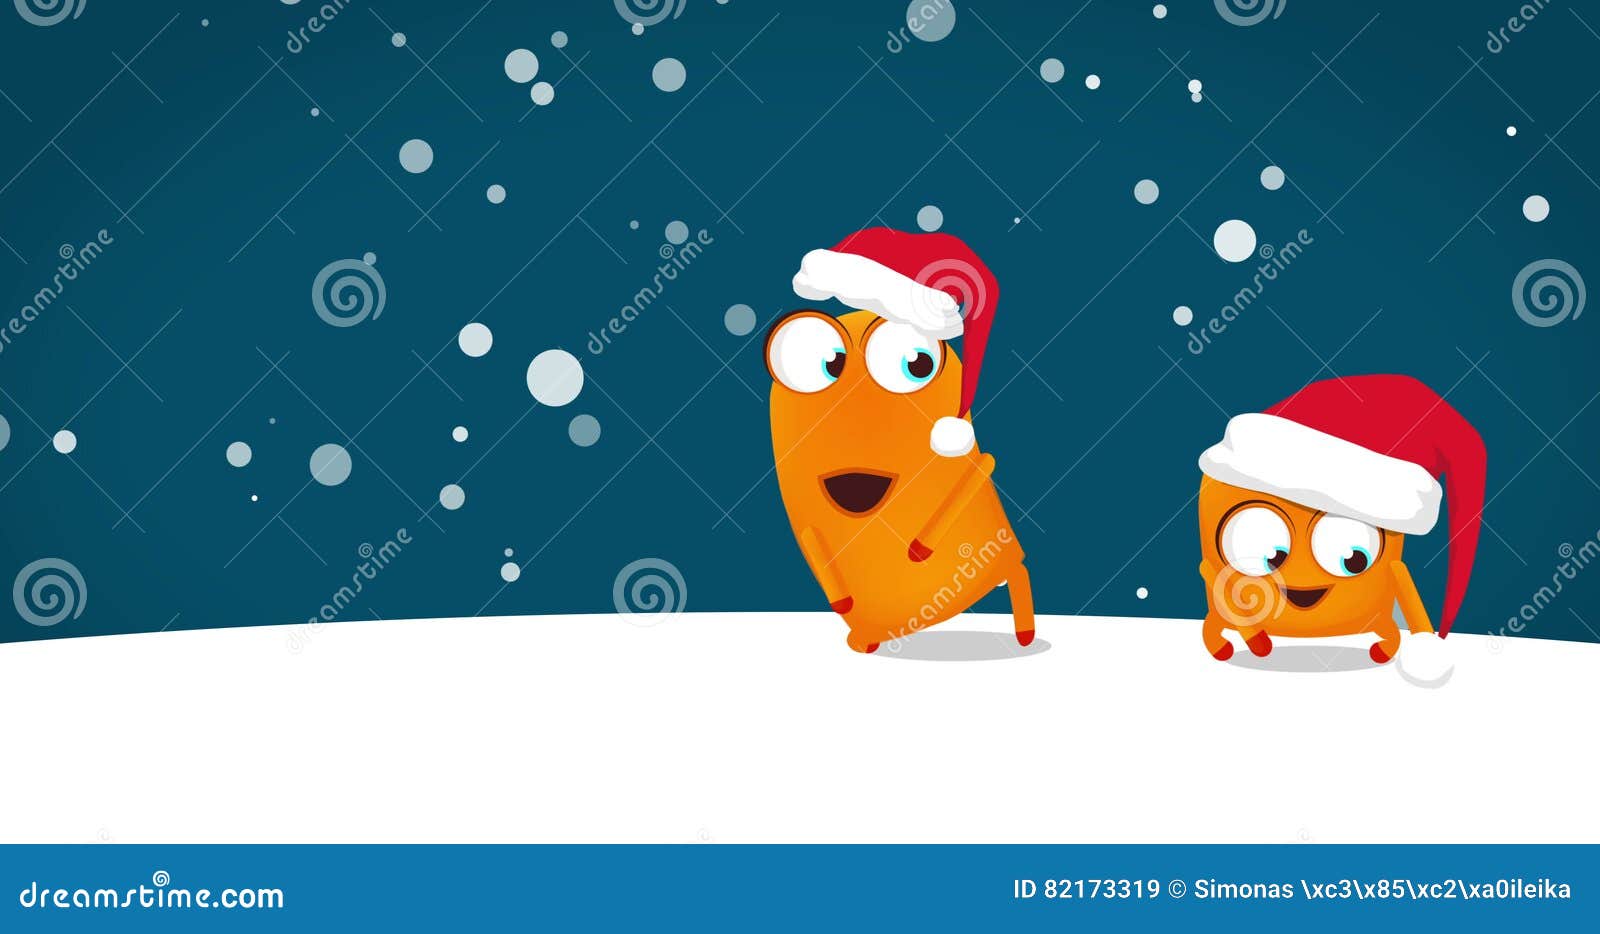 Two Upsies Upsy Character Dancing Crazy Funny Christmas Dance on Snowy  Night. 4k, Space for Text, Greeting Video Stock Video - Video of screen,  good: 82173319